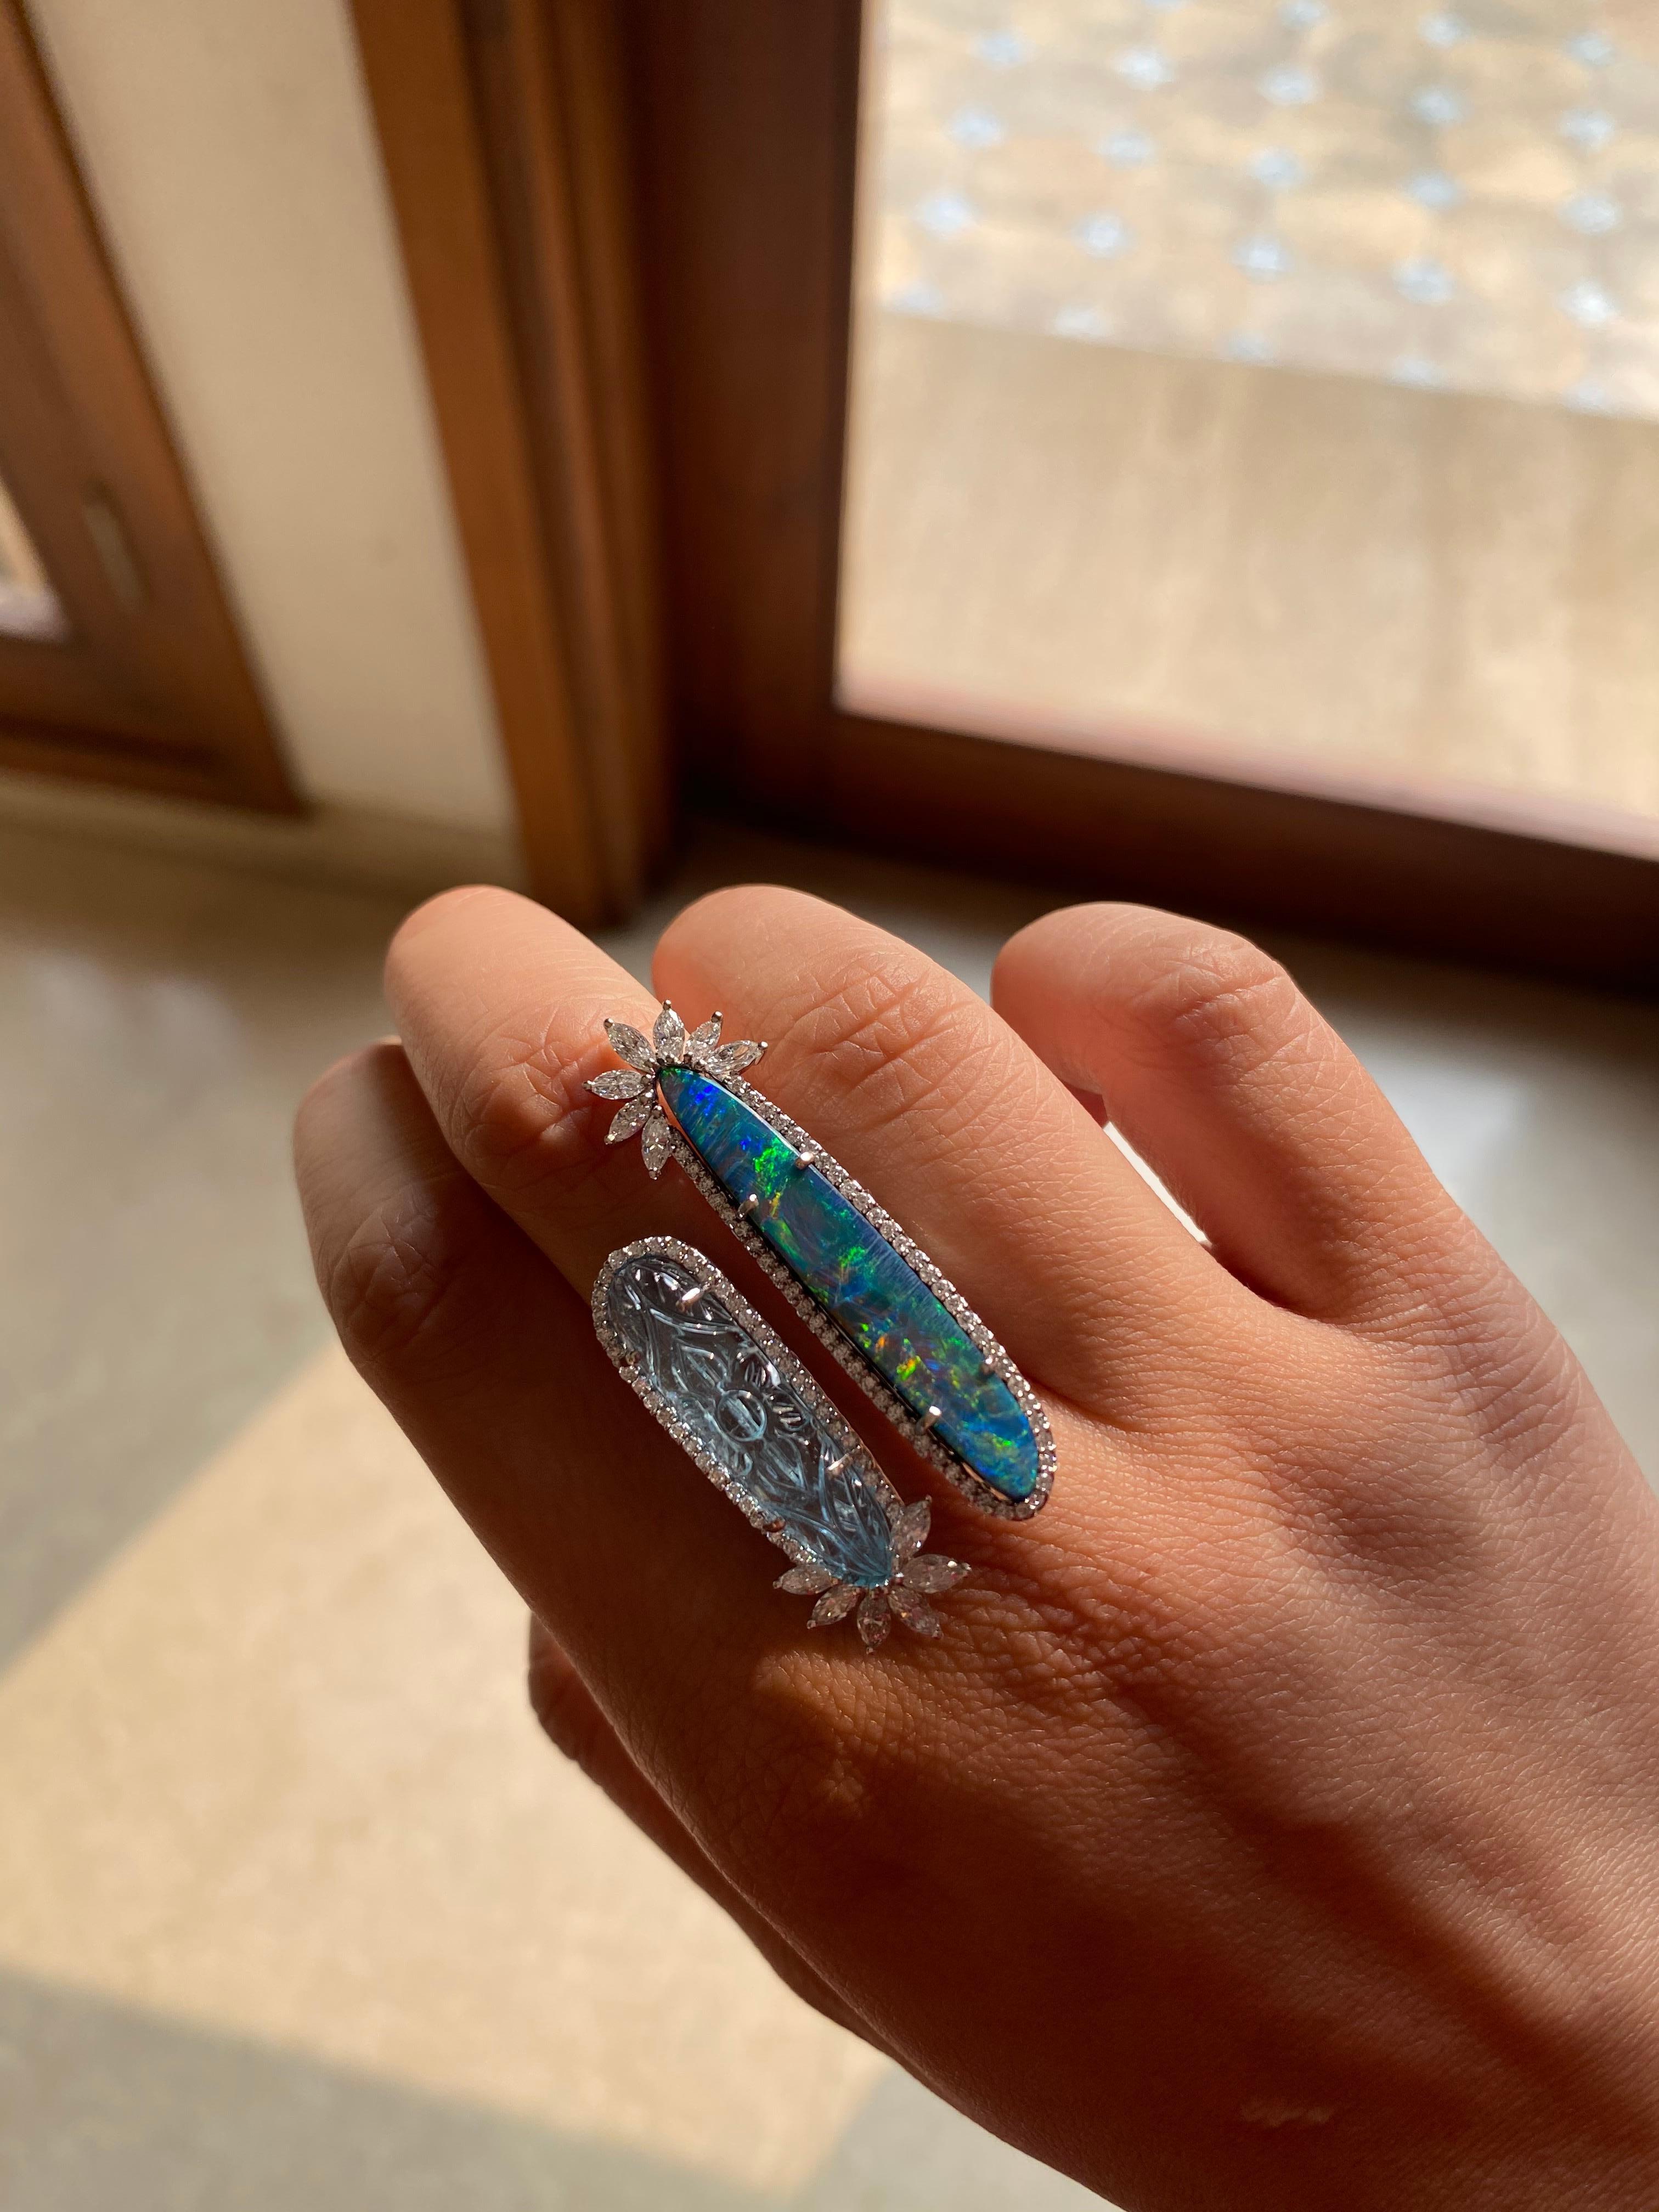 A modern and chic Aquamarine and Australian Opal Doublet ring set in 18k white god . The aquamarine weight 7.15 carats and opal weight is 5.99 carats . the diamond weight is 1.44 carats. The ring dimensions in cm 4.2 x 2.2 x 2.4 (LXWXH). US 6